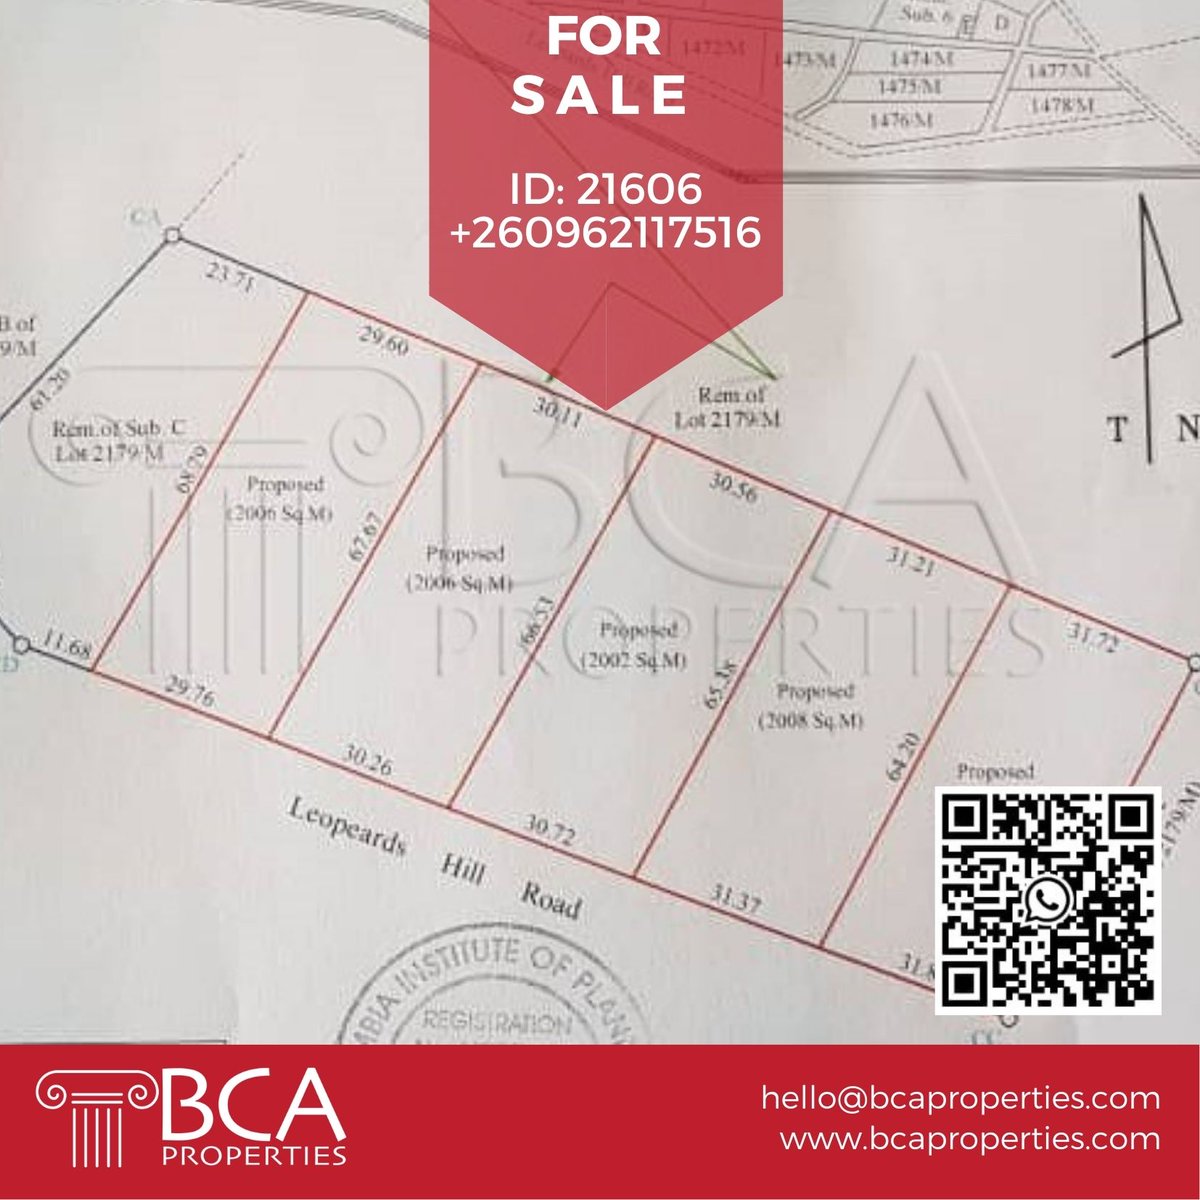 Prime plots for sale on Leopards Hill road each measuring approximately 2000 square metres in size. Get in touch for keen inquiries.
See more details: bcaproperties.com/property/prime…
#bcaproperties #propertyinzambia #property #realestate #PrimeLocation #leopardshill #landforsale